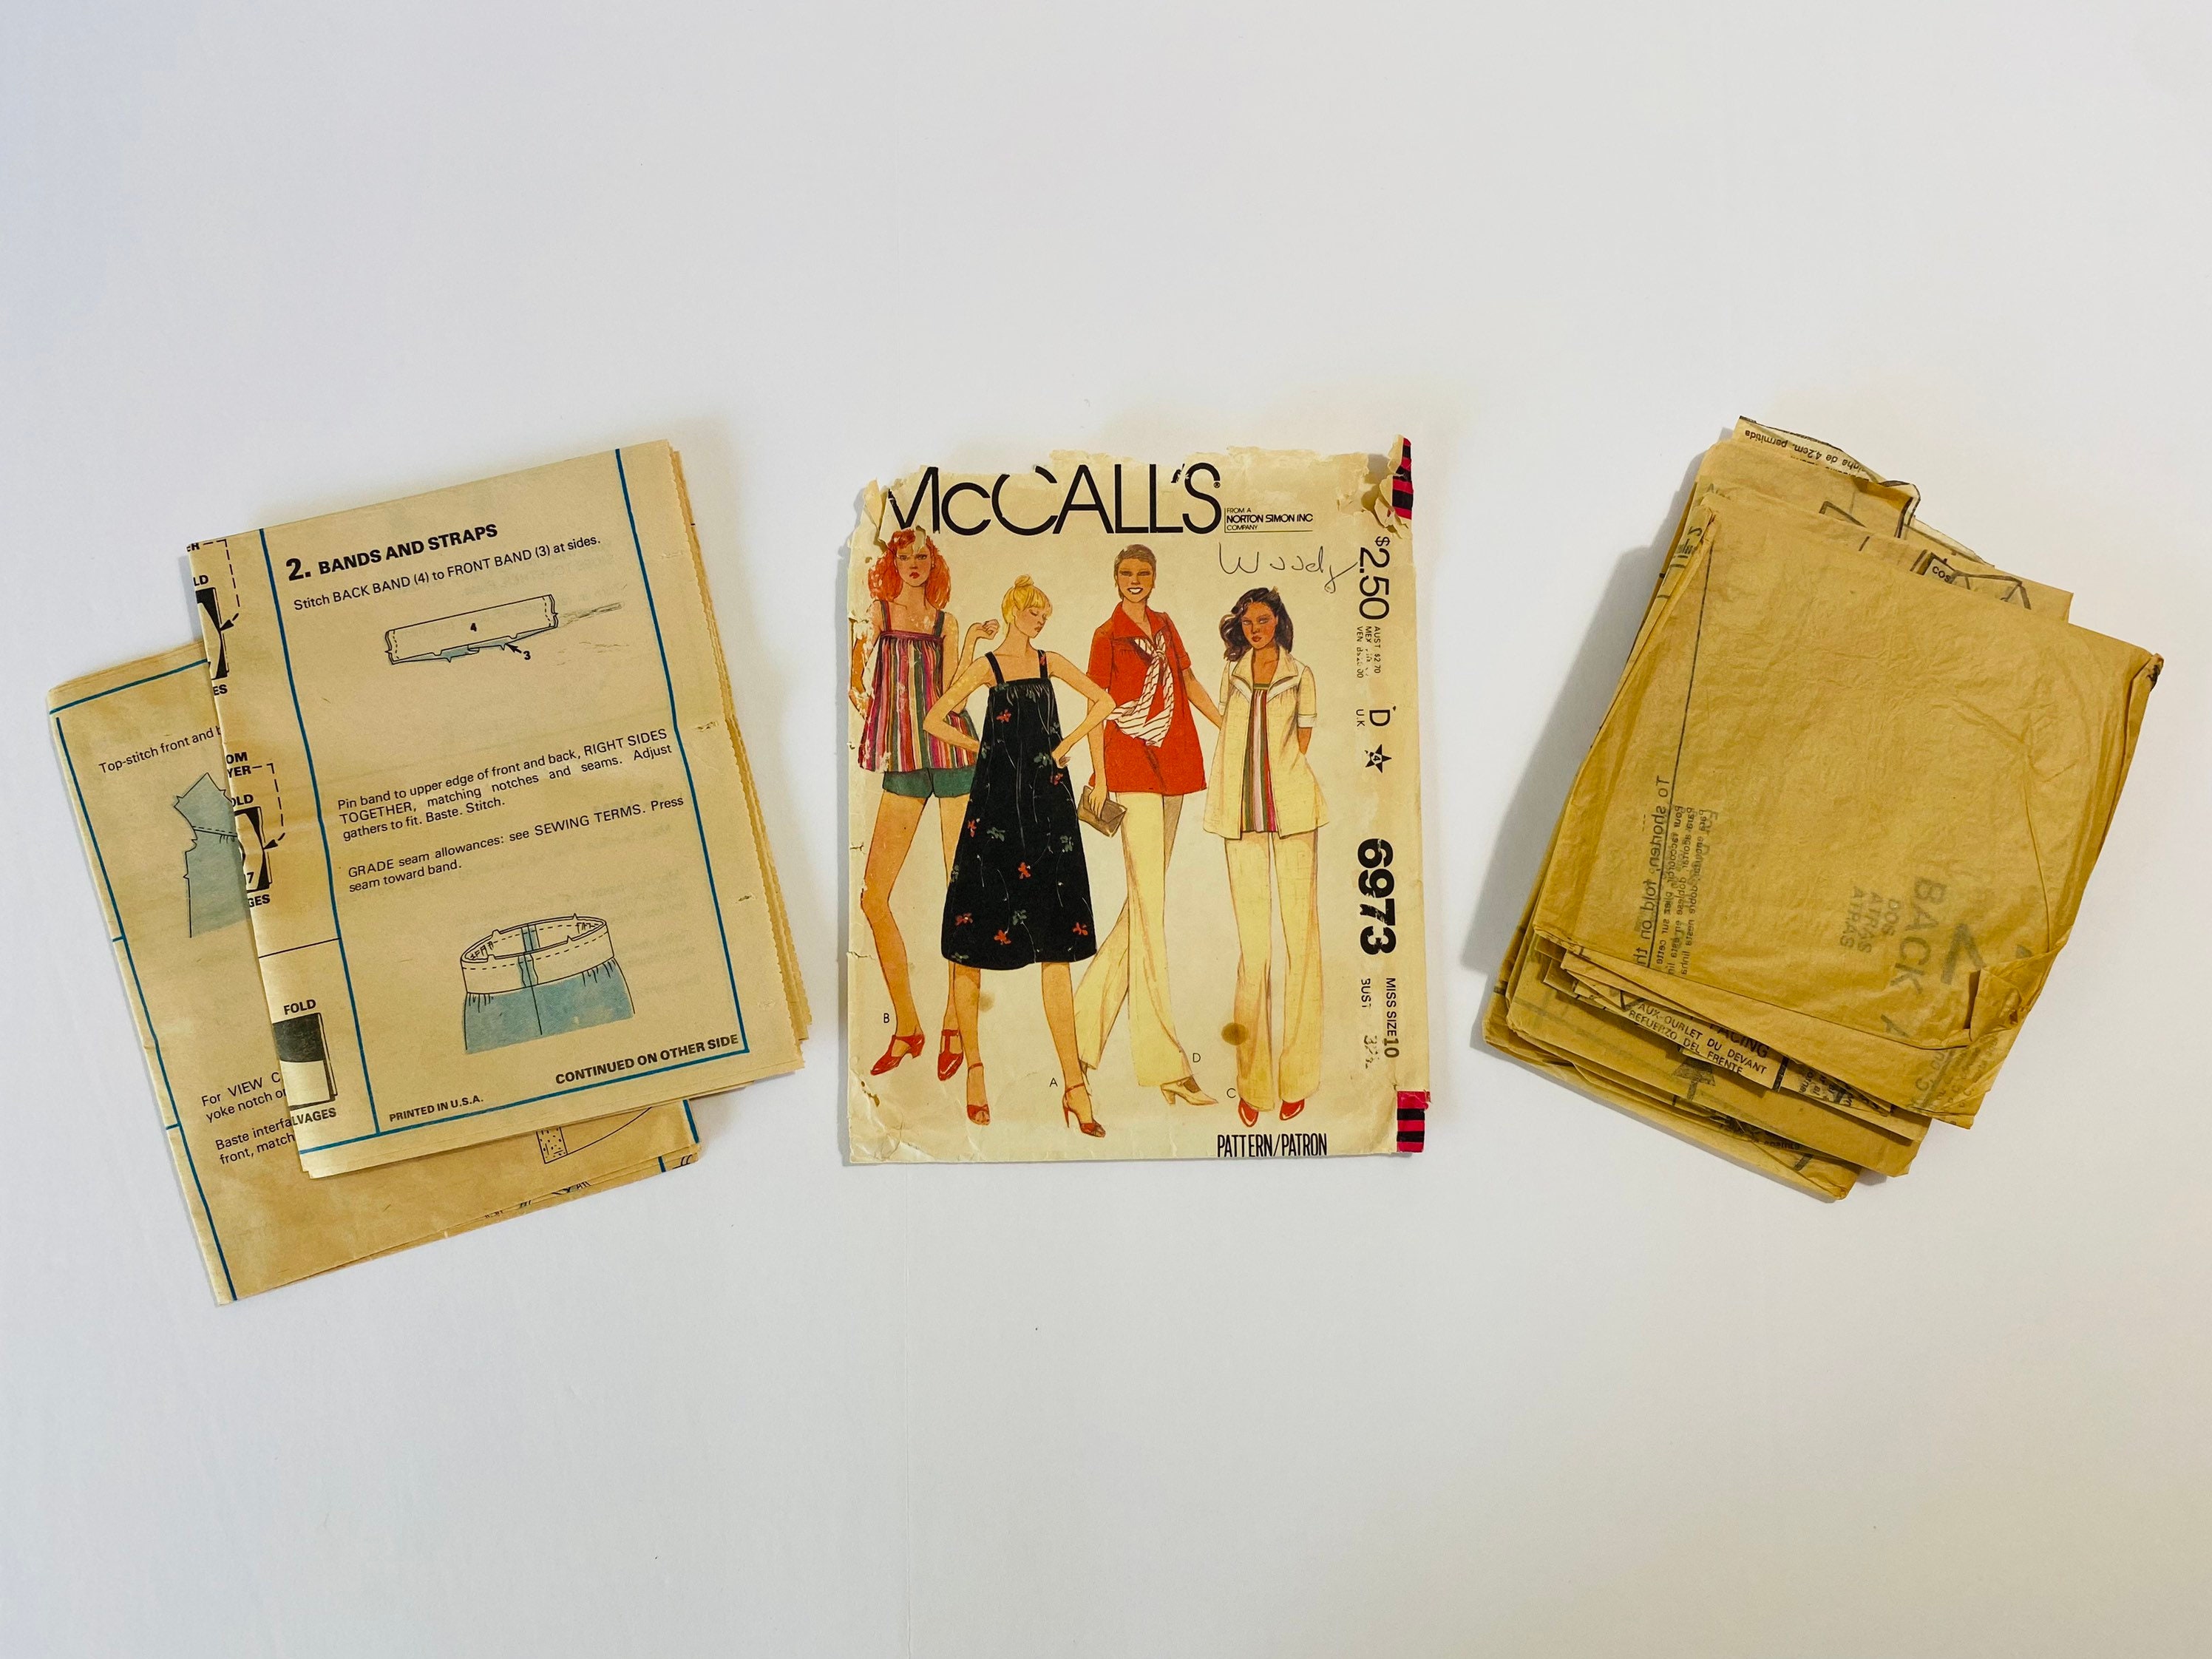 Mccall's 6973 bust 32.5 vintage 1970s Sewing - Etsy